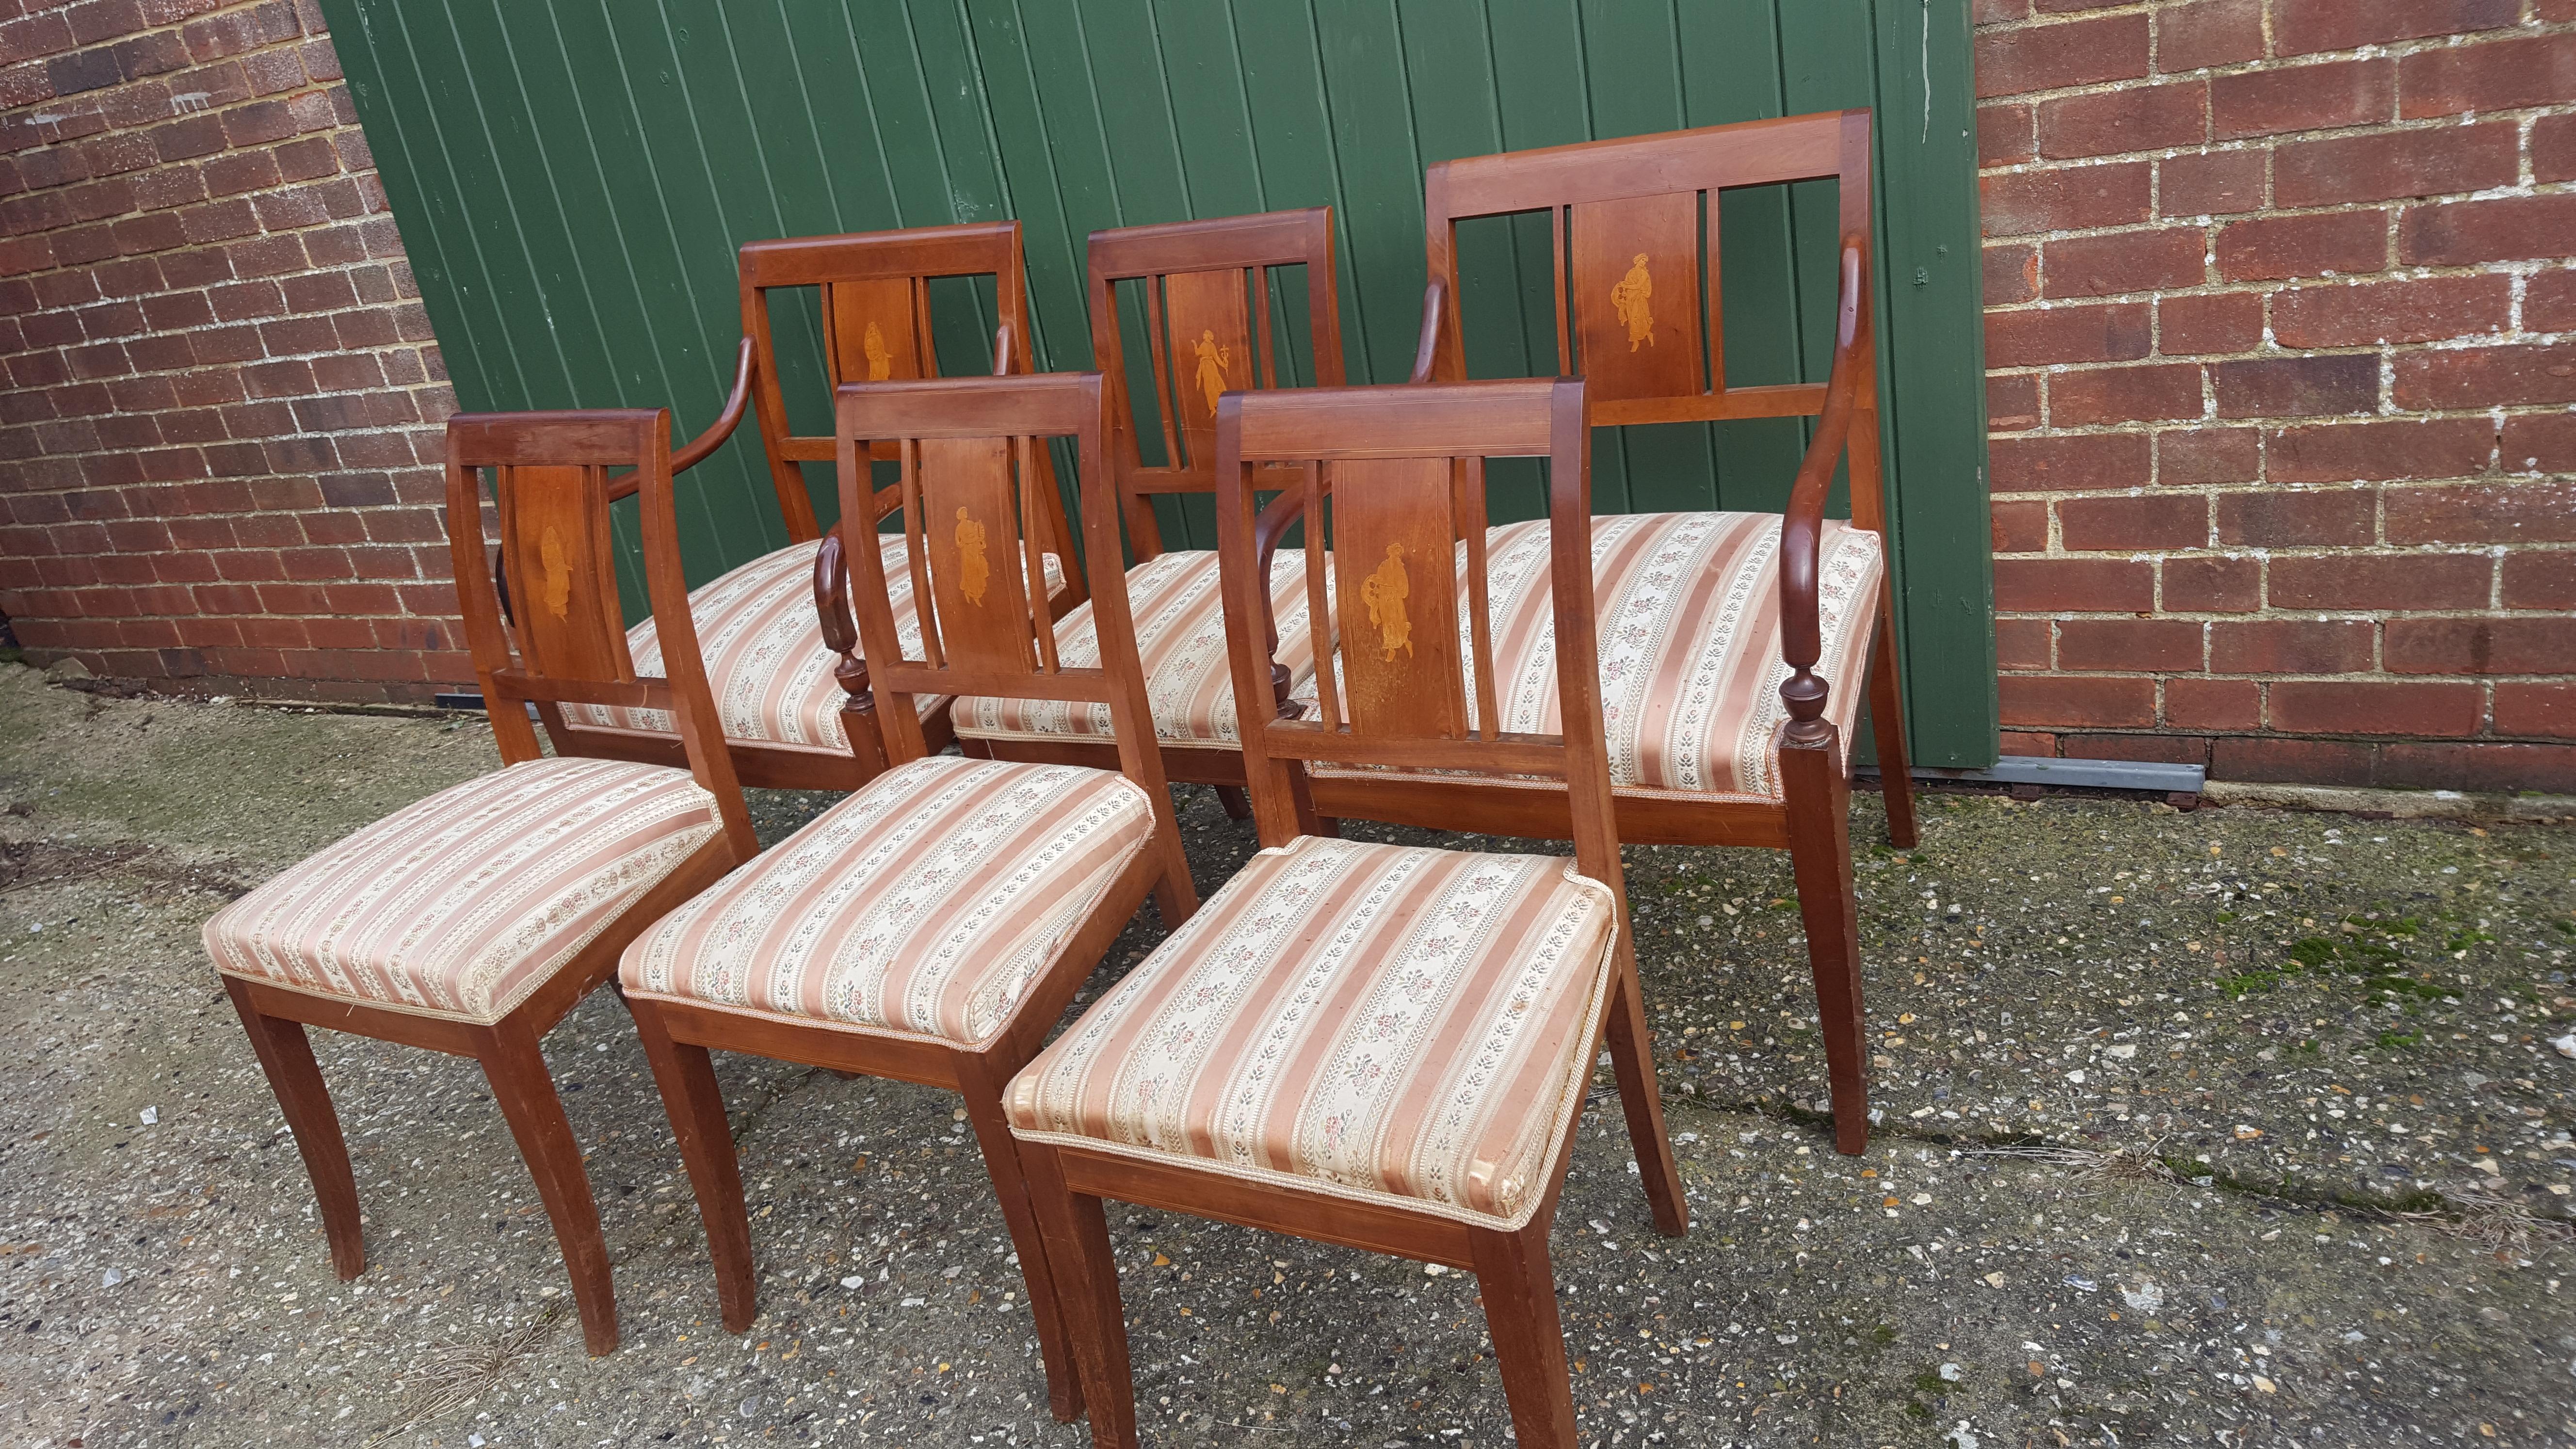 Set of 6 antique Swedish flame golden birch Art Deco dining chairs with the distinctive inlaid seat backs with beautiful detailed marquetry figures of woman.

The top grade flame veneers are brought to life by the sought after darker honey color